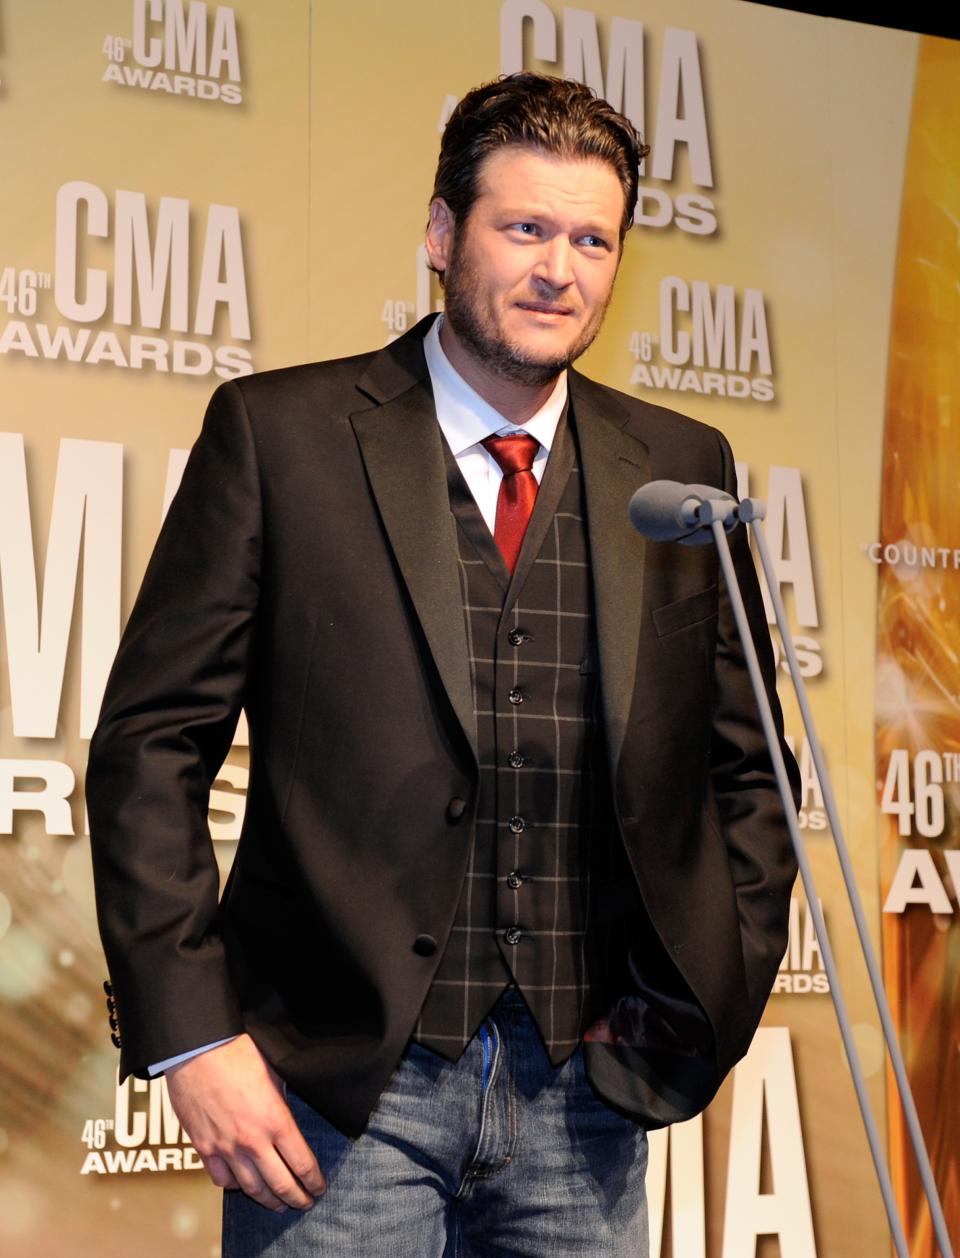 NASHVILLE, TN - NOVEMBER 01: Blake Shelton attends the 46th annual CMA Awards at the Bridgestone Arena on November 1, 2012 in Nashville, Tennessee. (Photo by Erika Goldring/Getty Images)